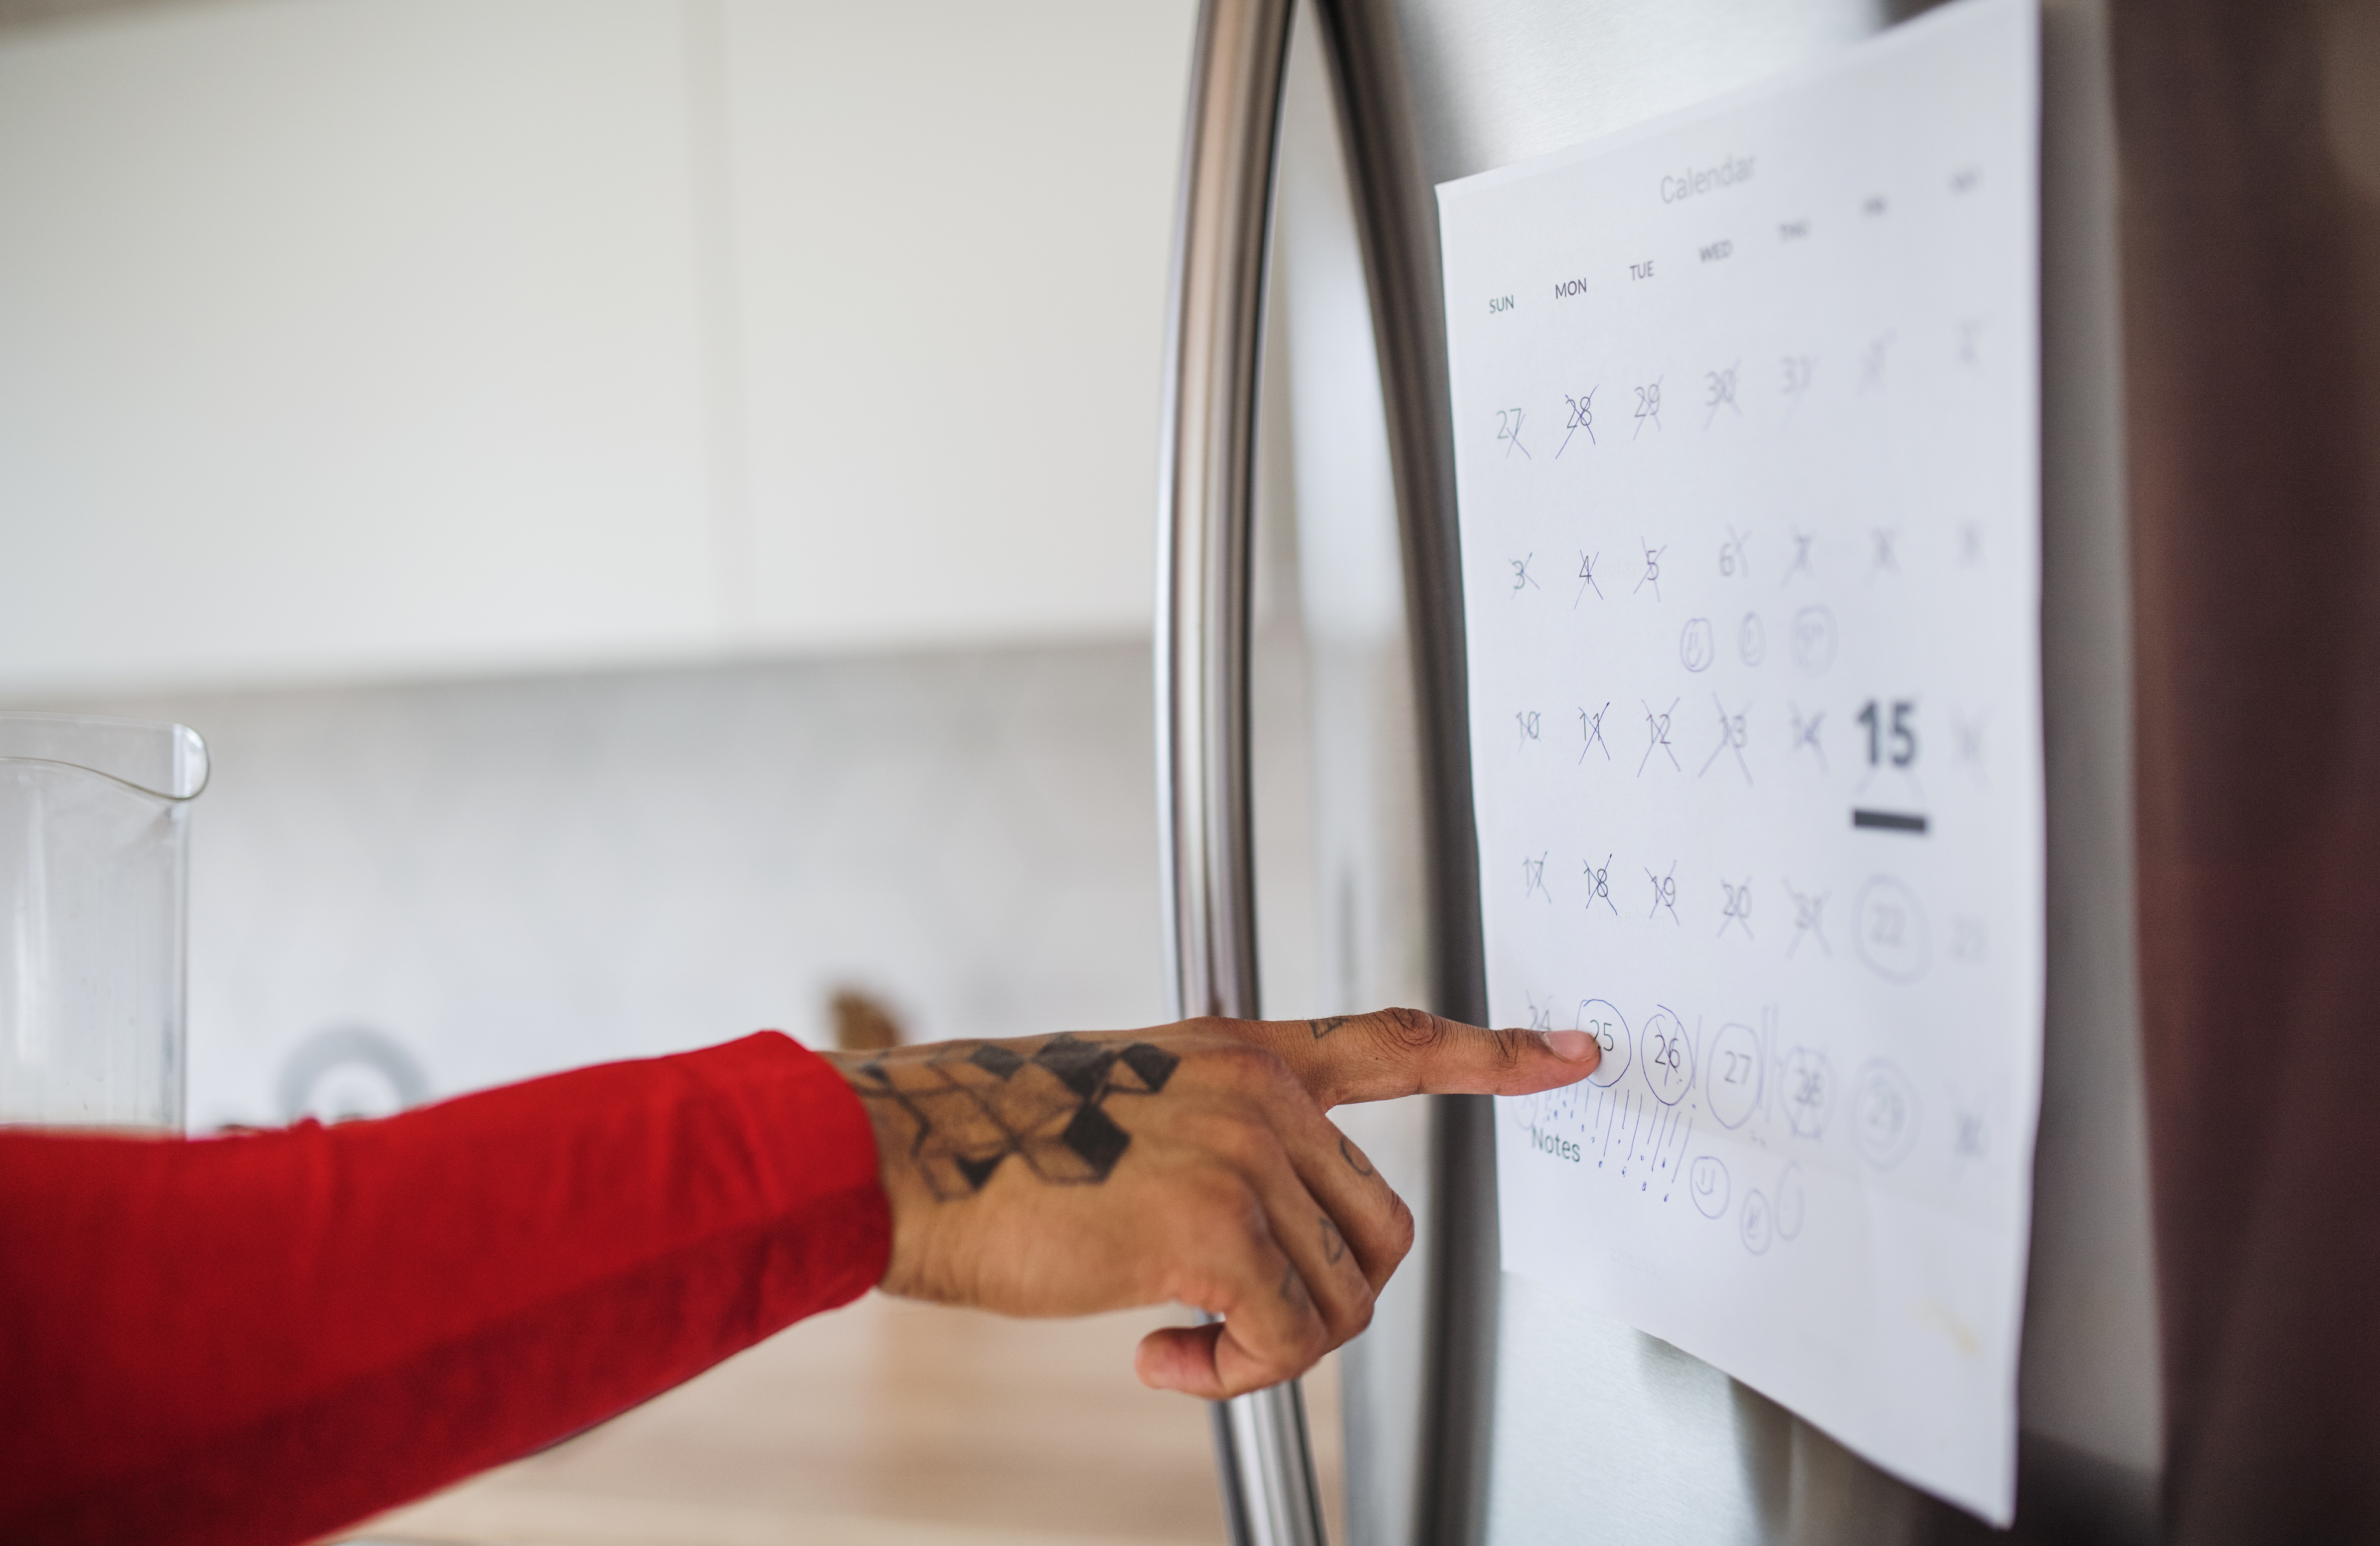 A person&#x27;s arm with tattooed hand in a red sleeve points to dates on a calendar hanging on a refrigerator, highlighting the 15th of the month